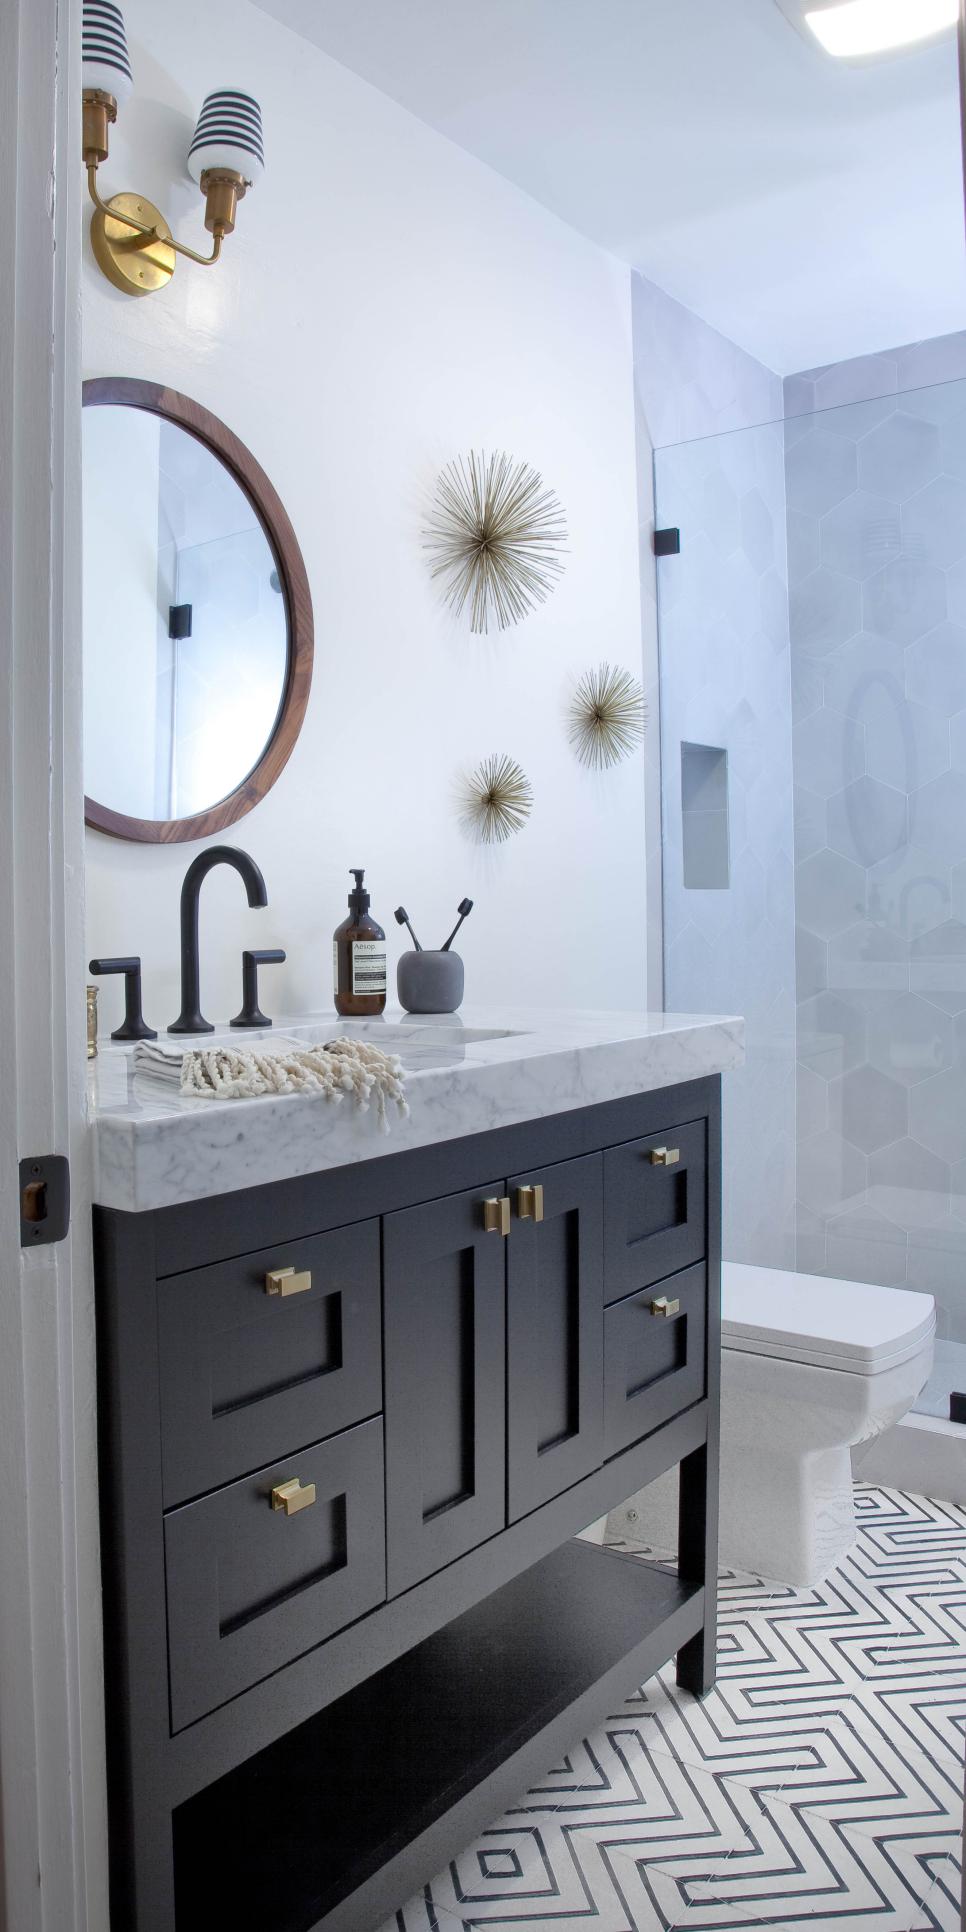 Contemporary Black-and-White Bathroom is Chic, Playful | HGTV